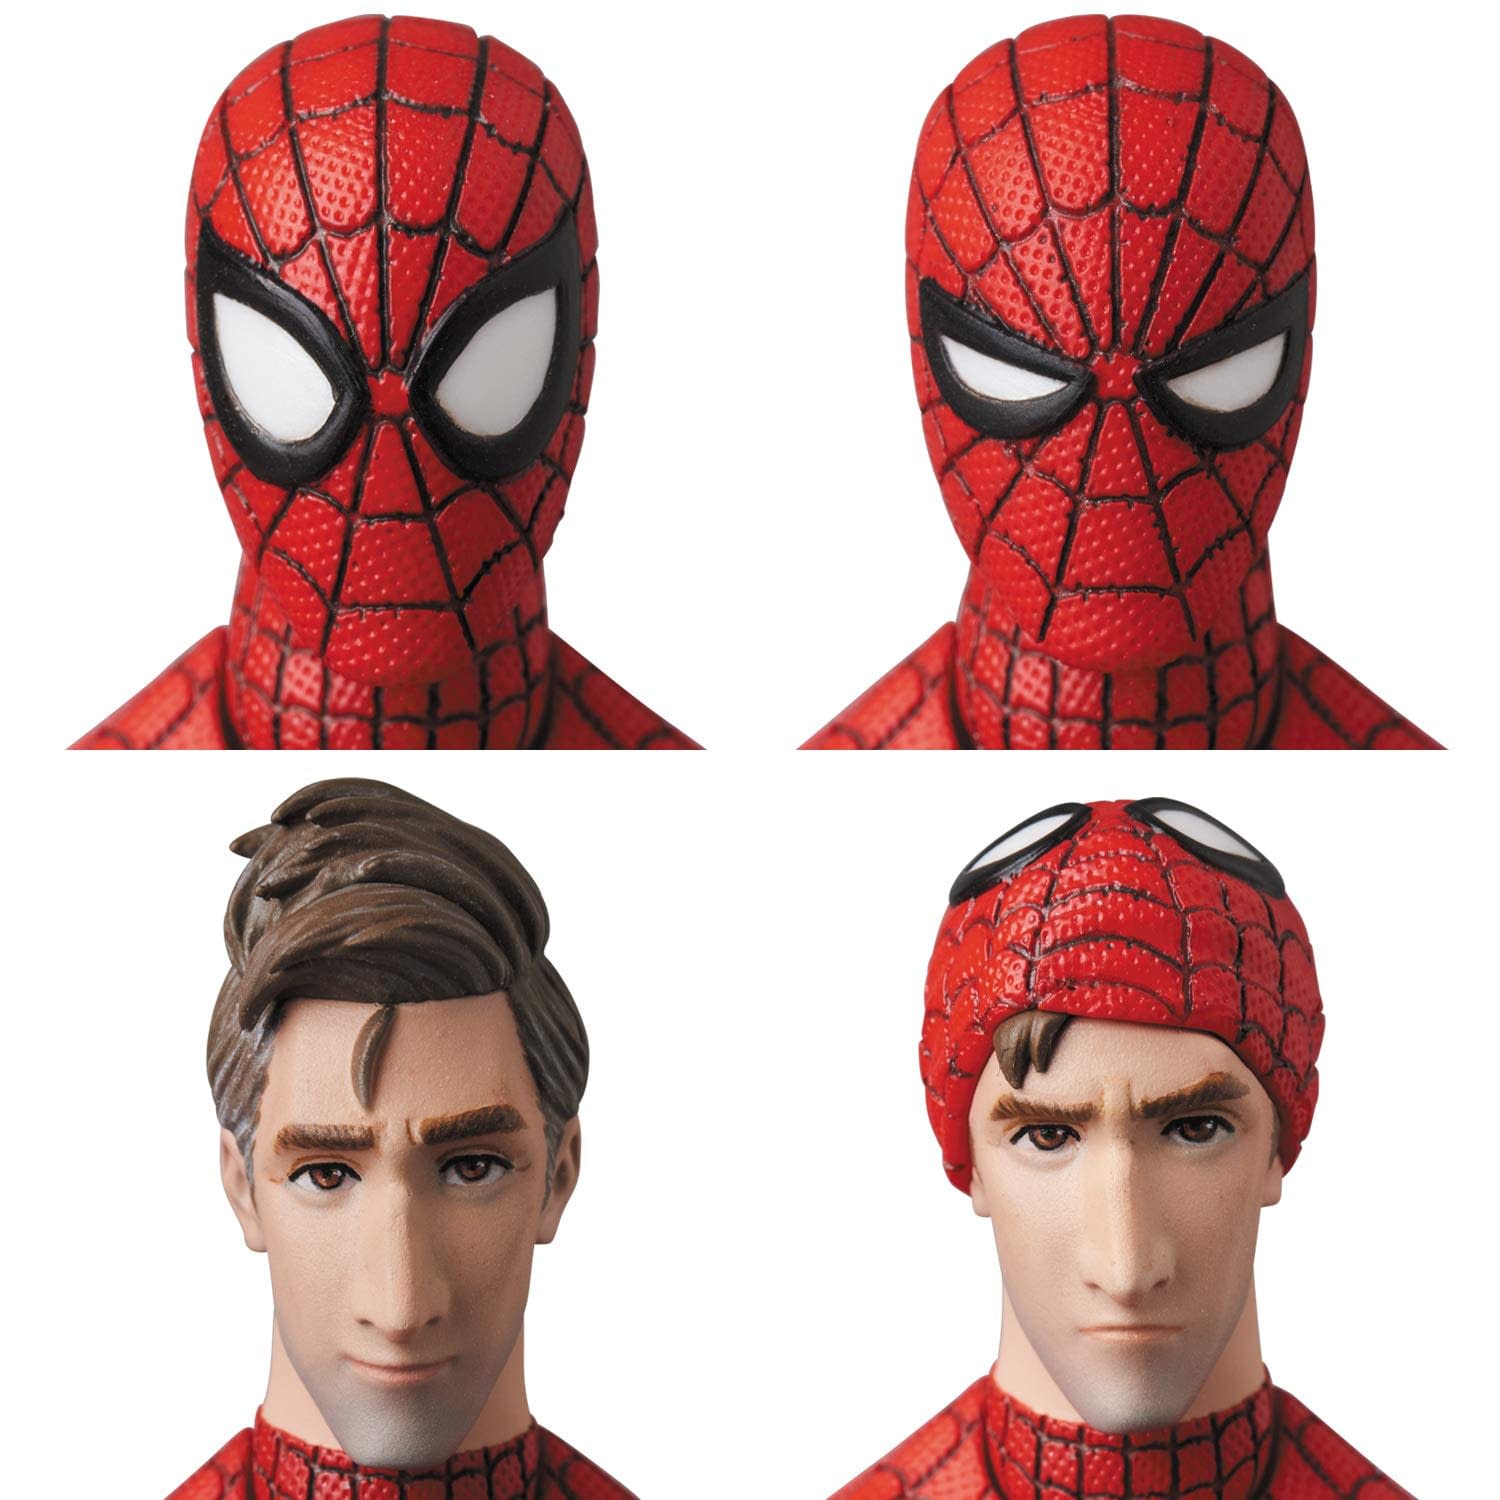 Spider-Man Swings Into Action with New Amazing Mafex Figure!